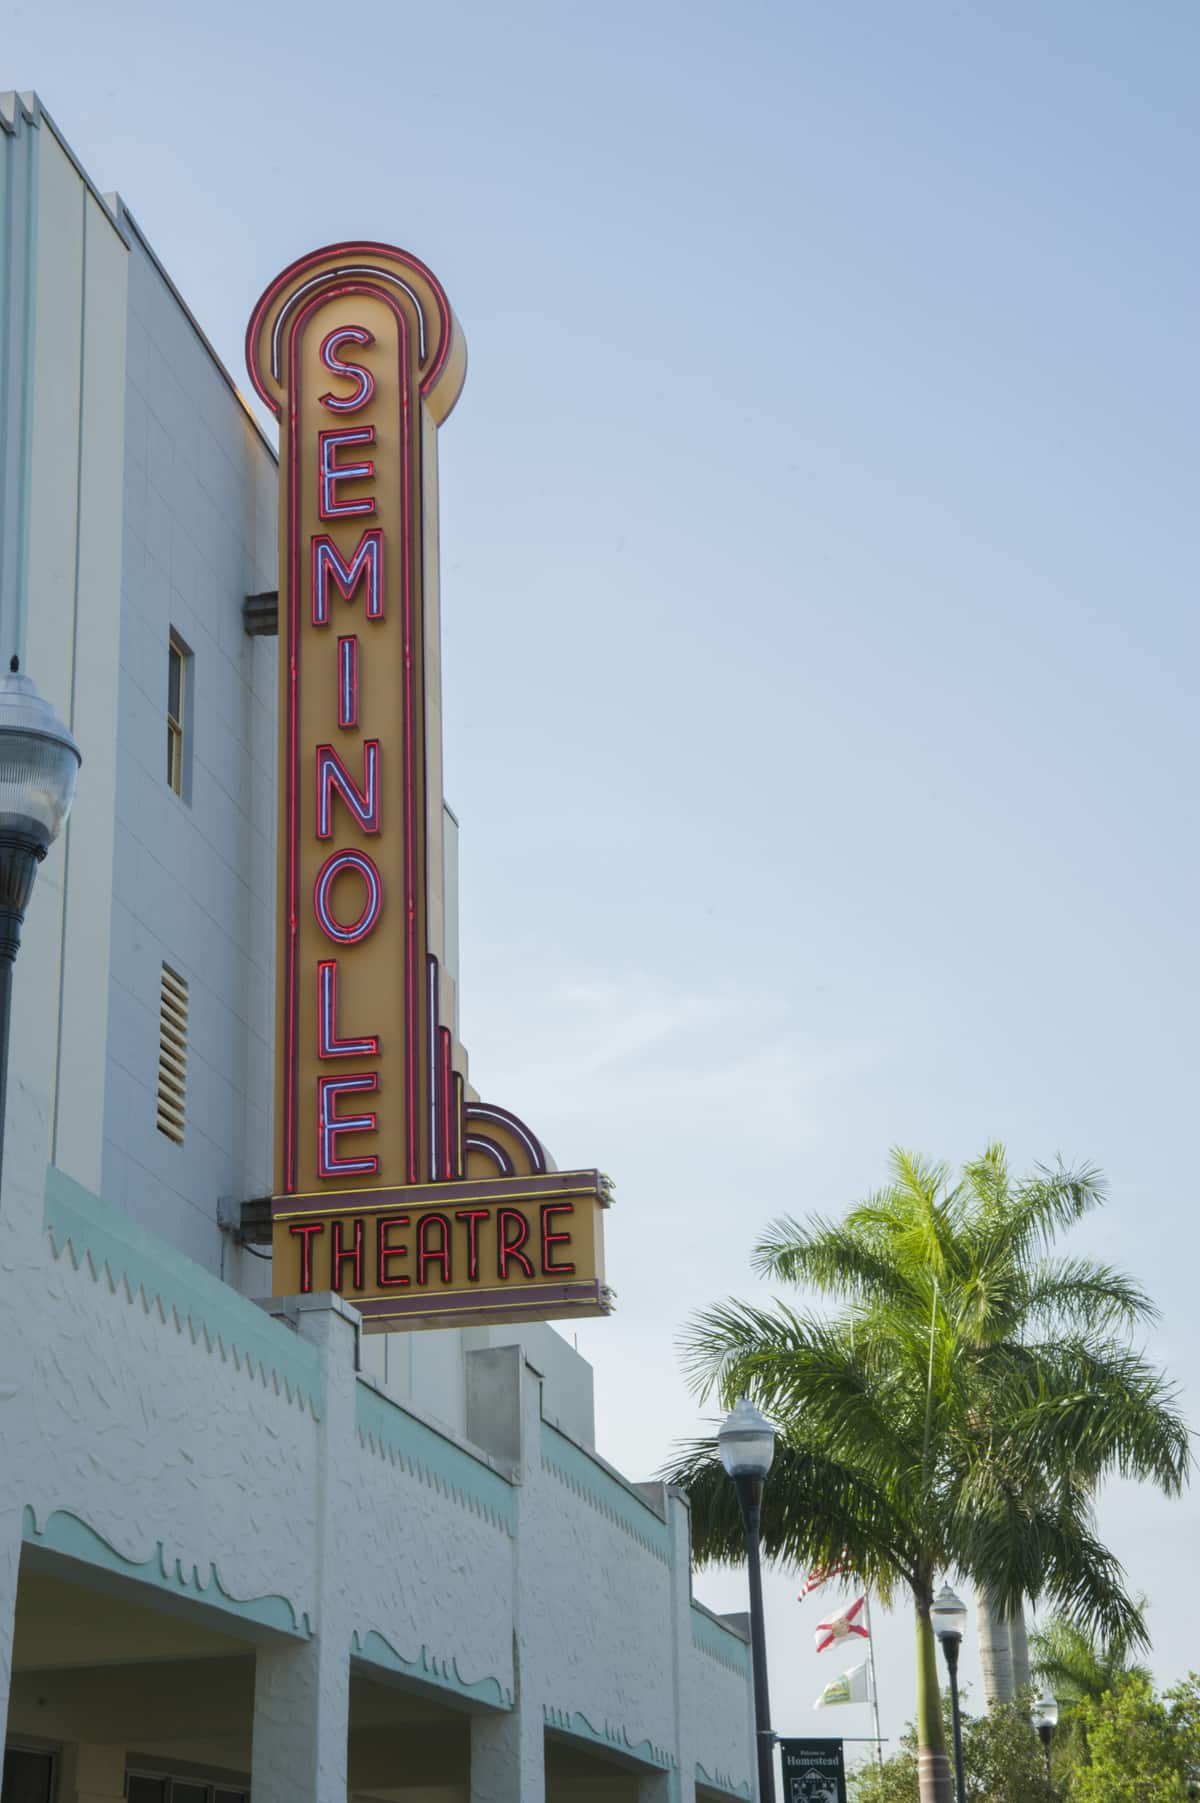 Seminole Theater Homestead Florida brings a lot of history to its town